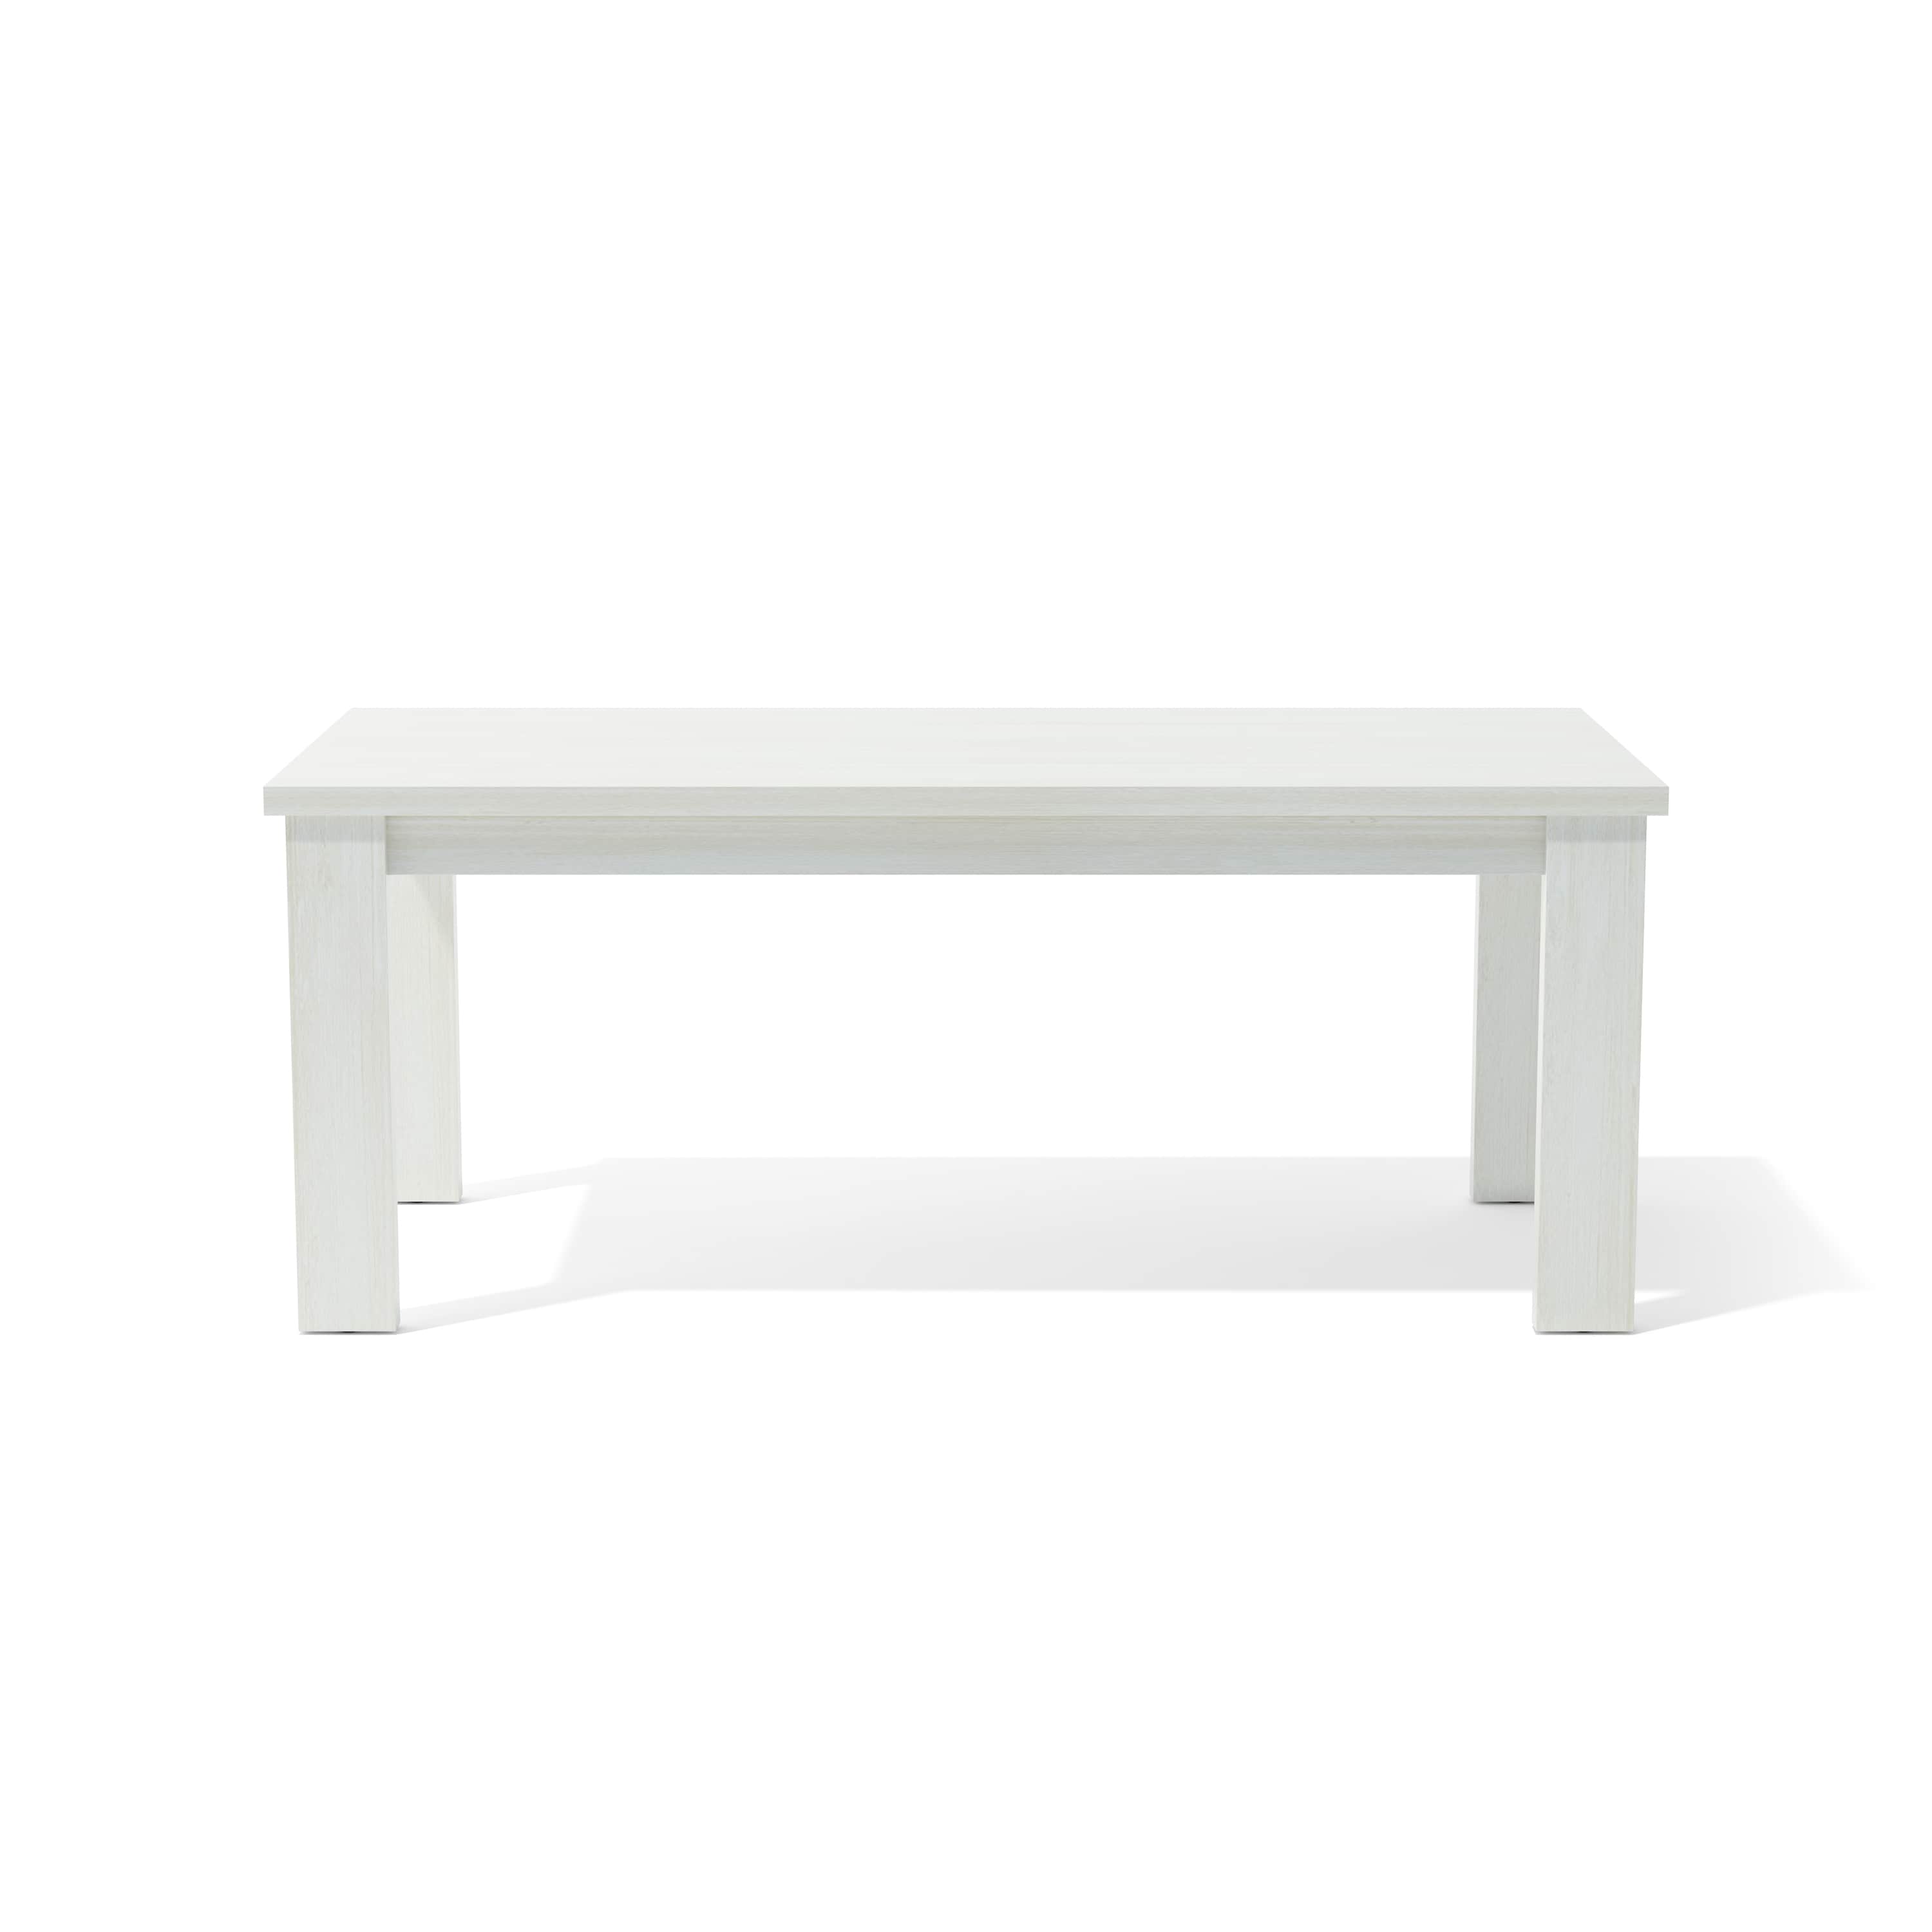 Anderson teak rectangle dining table in white